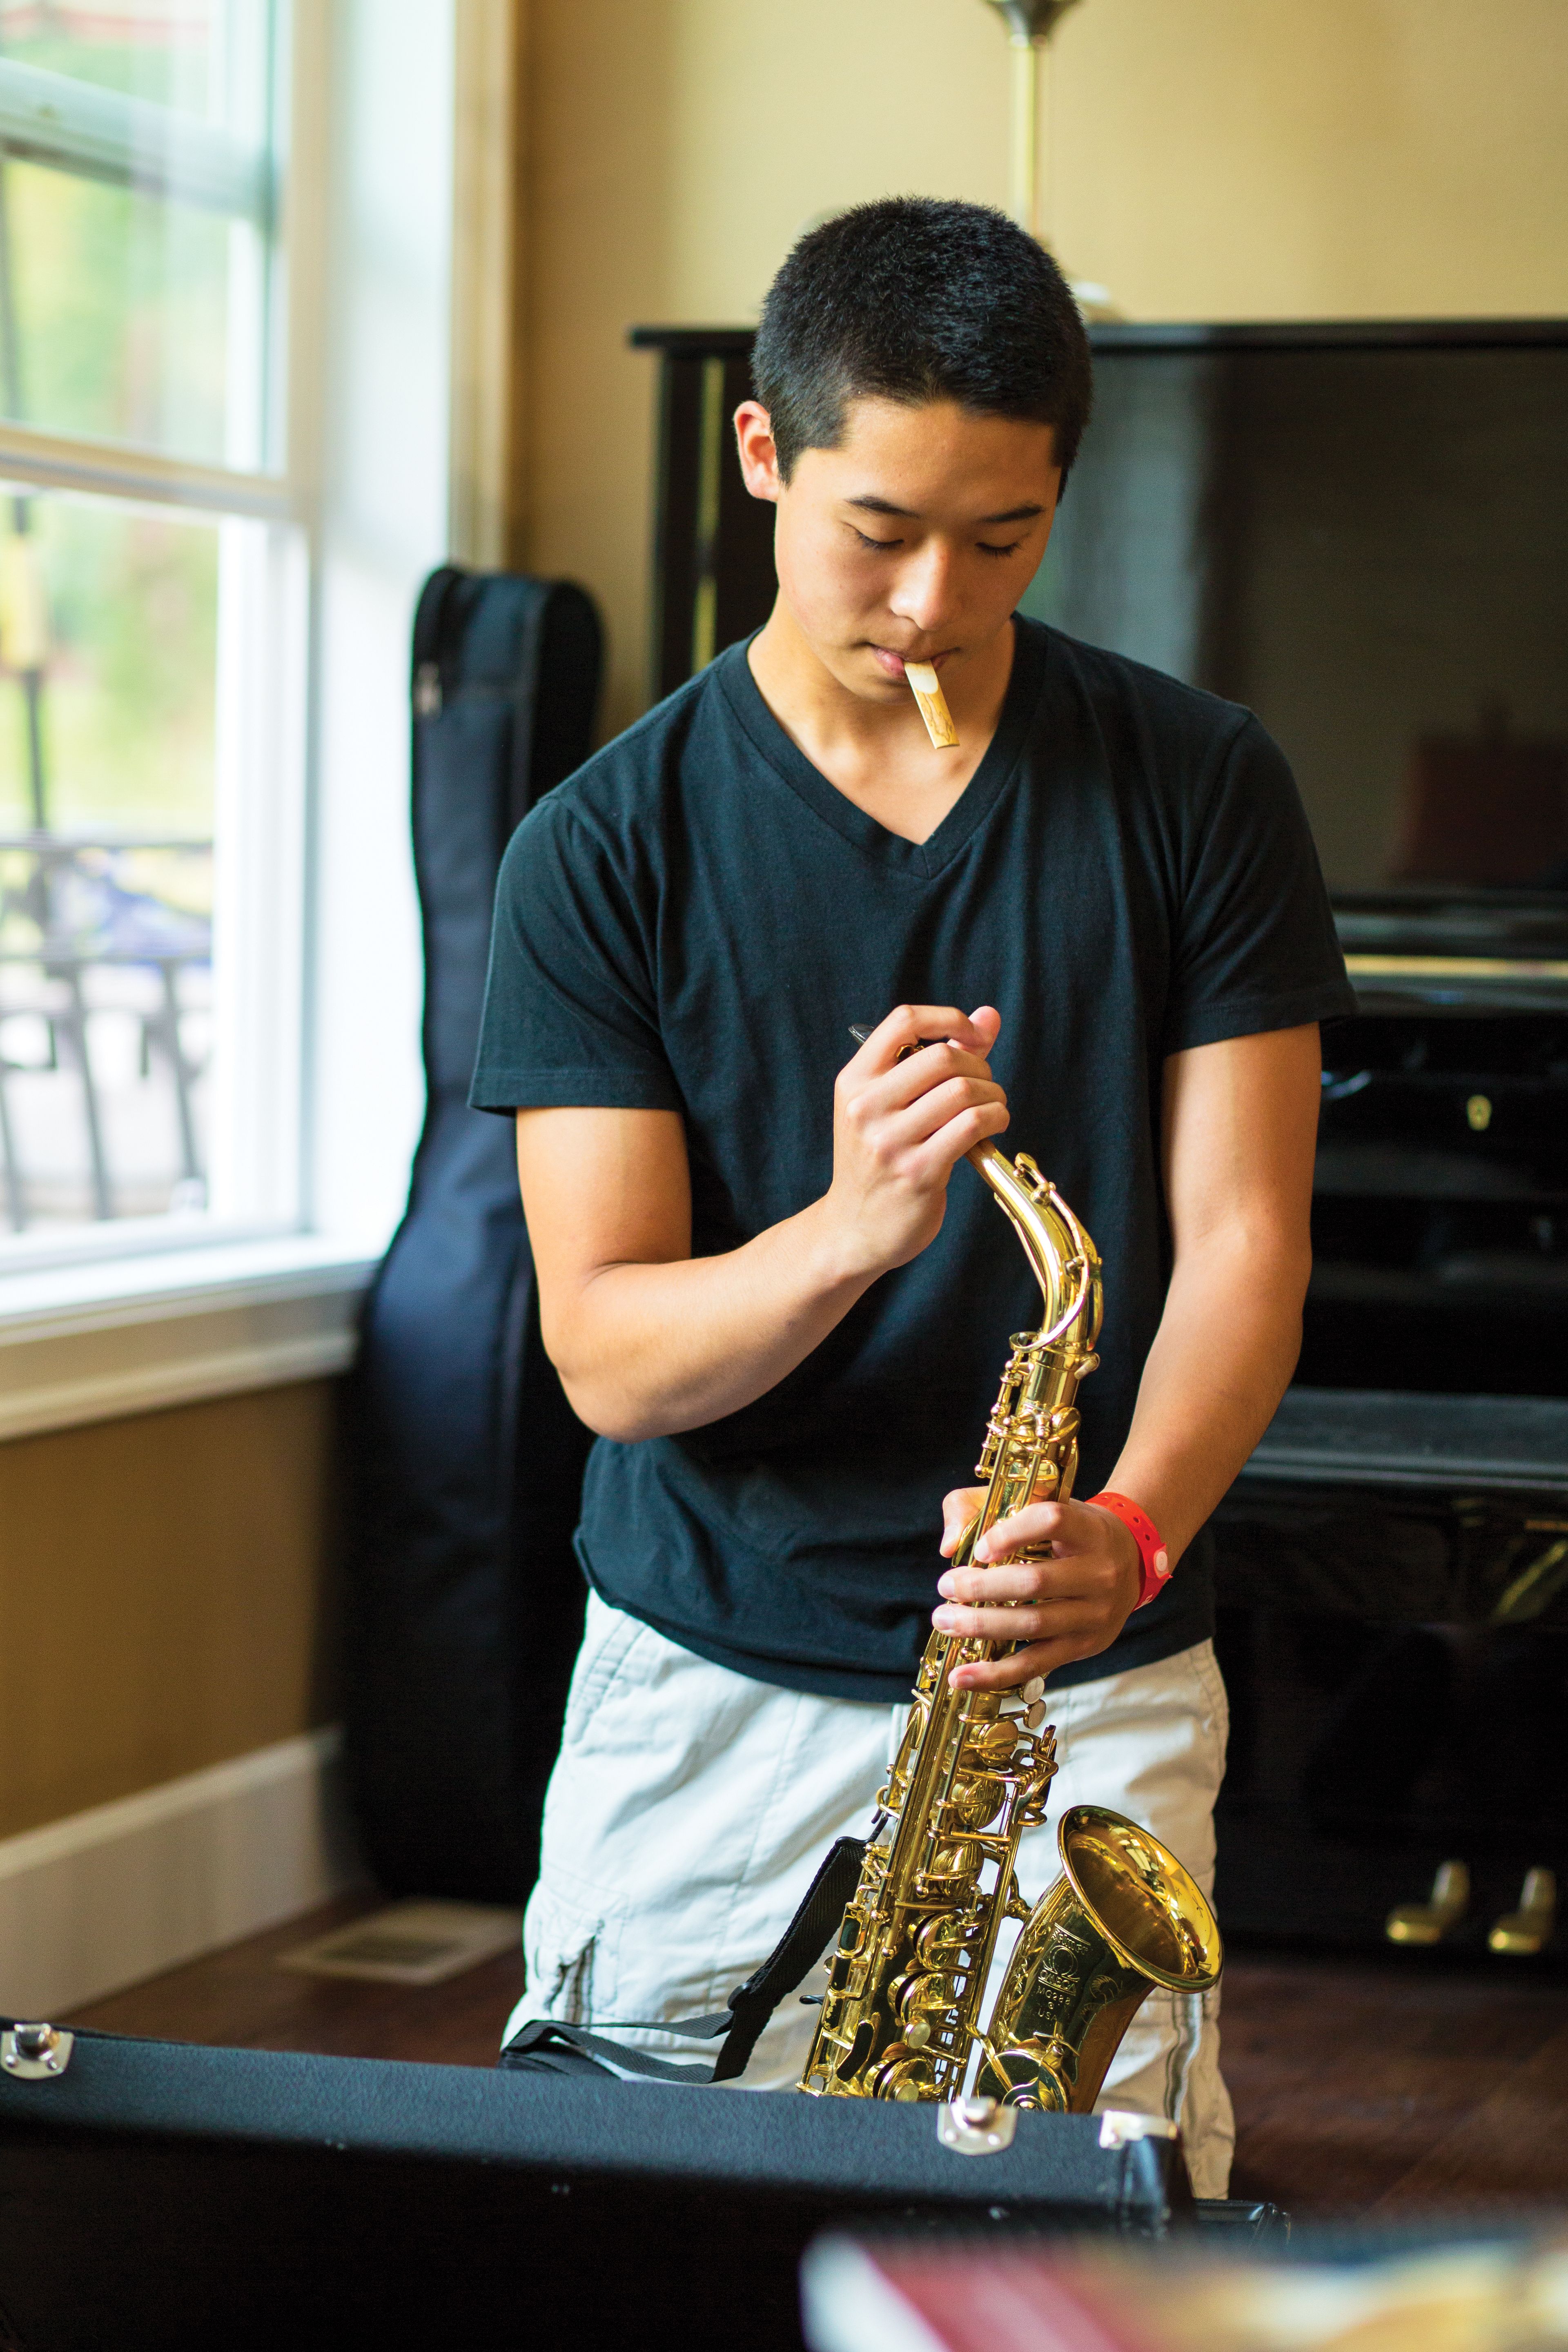 A young man prepares to put a reed on his saxophone.